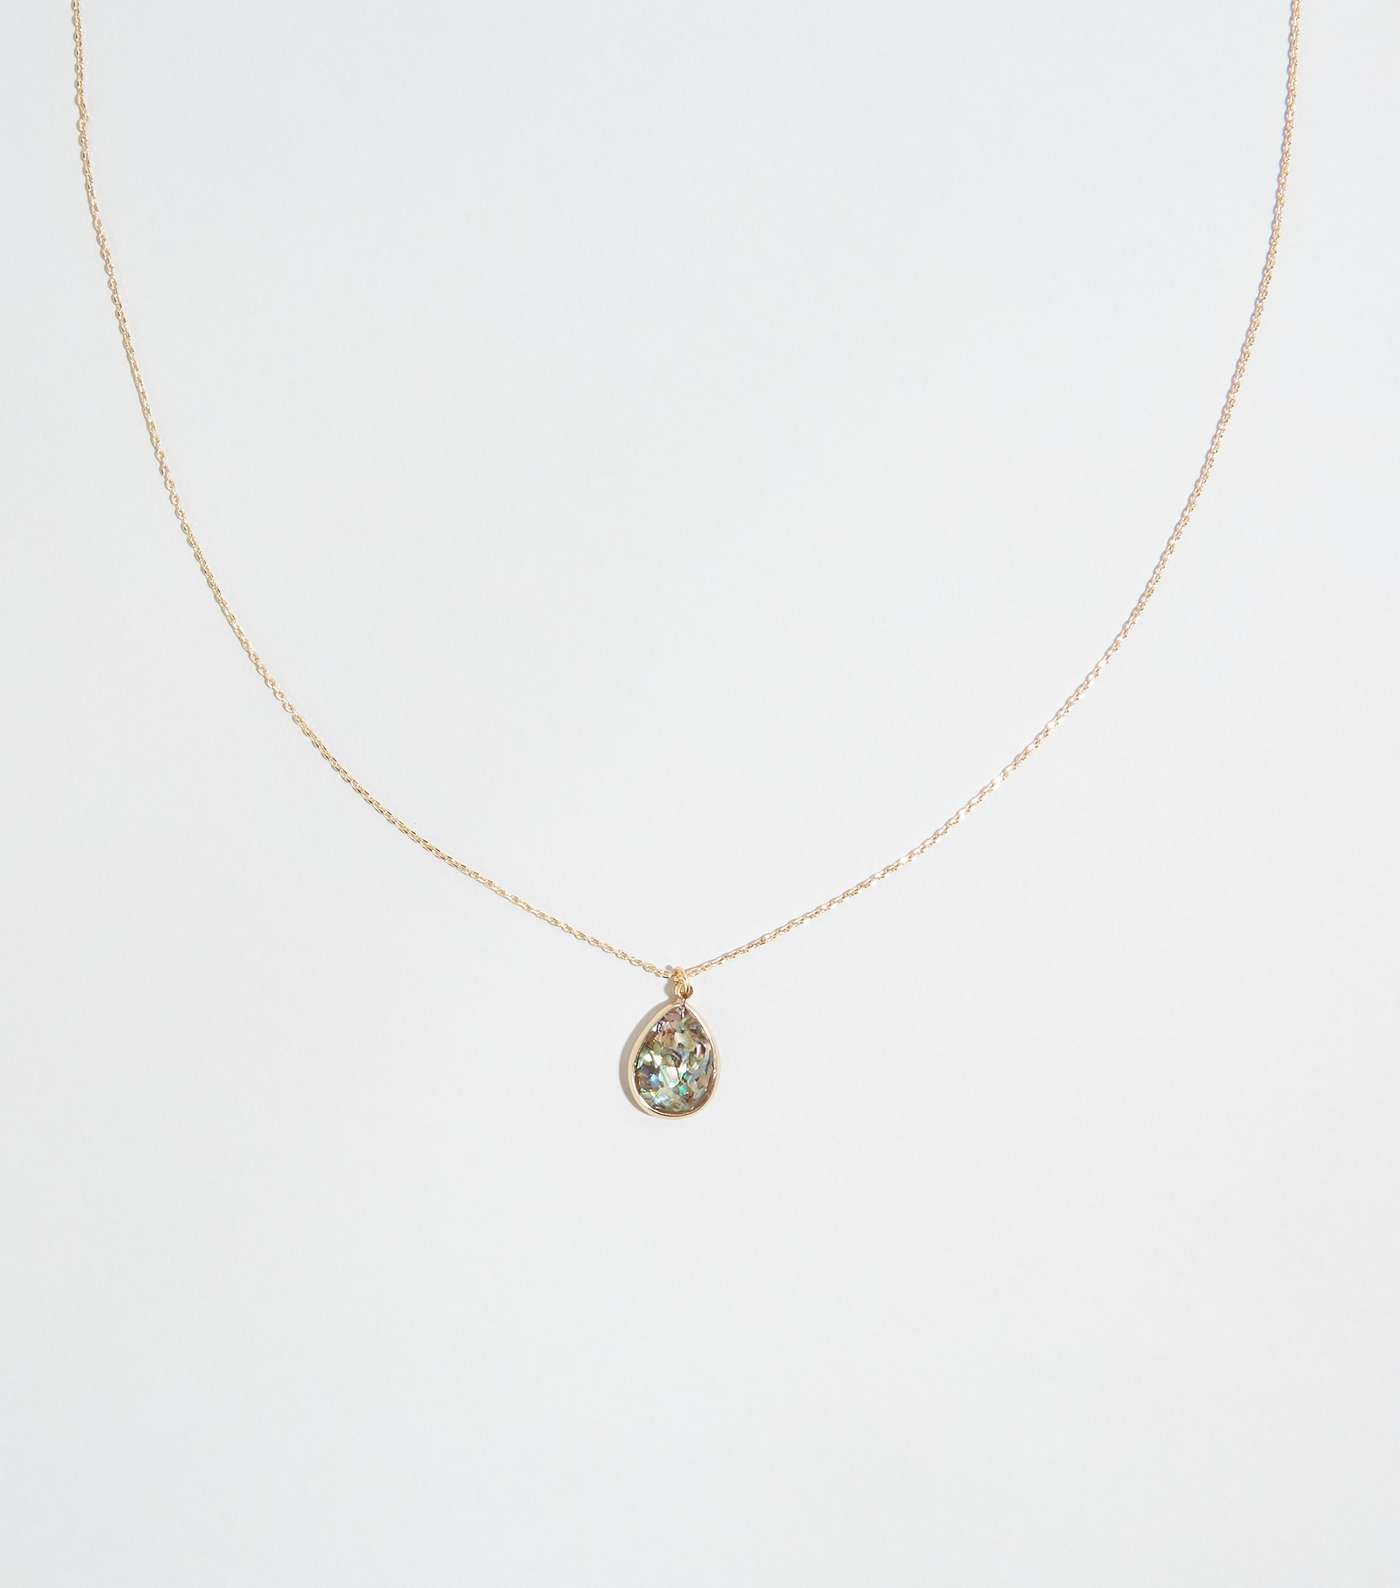 Gold Iridescent Shell Pendant Necklace